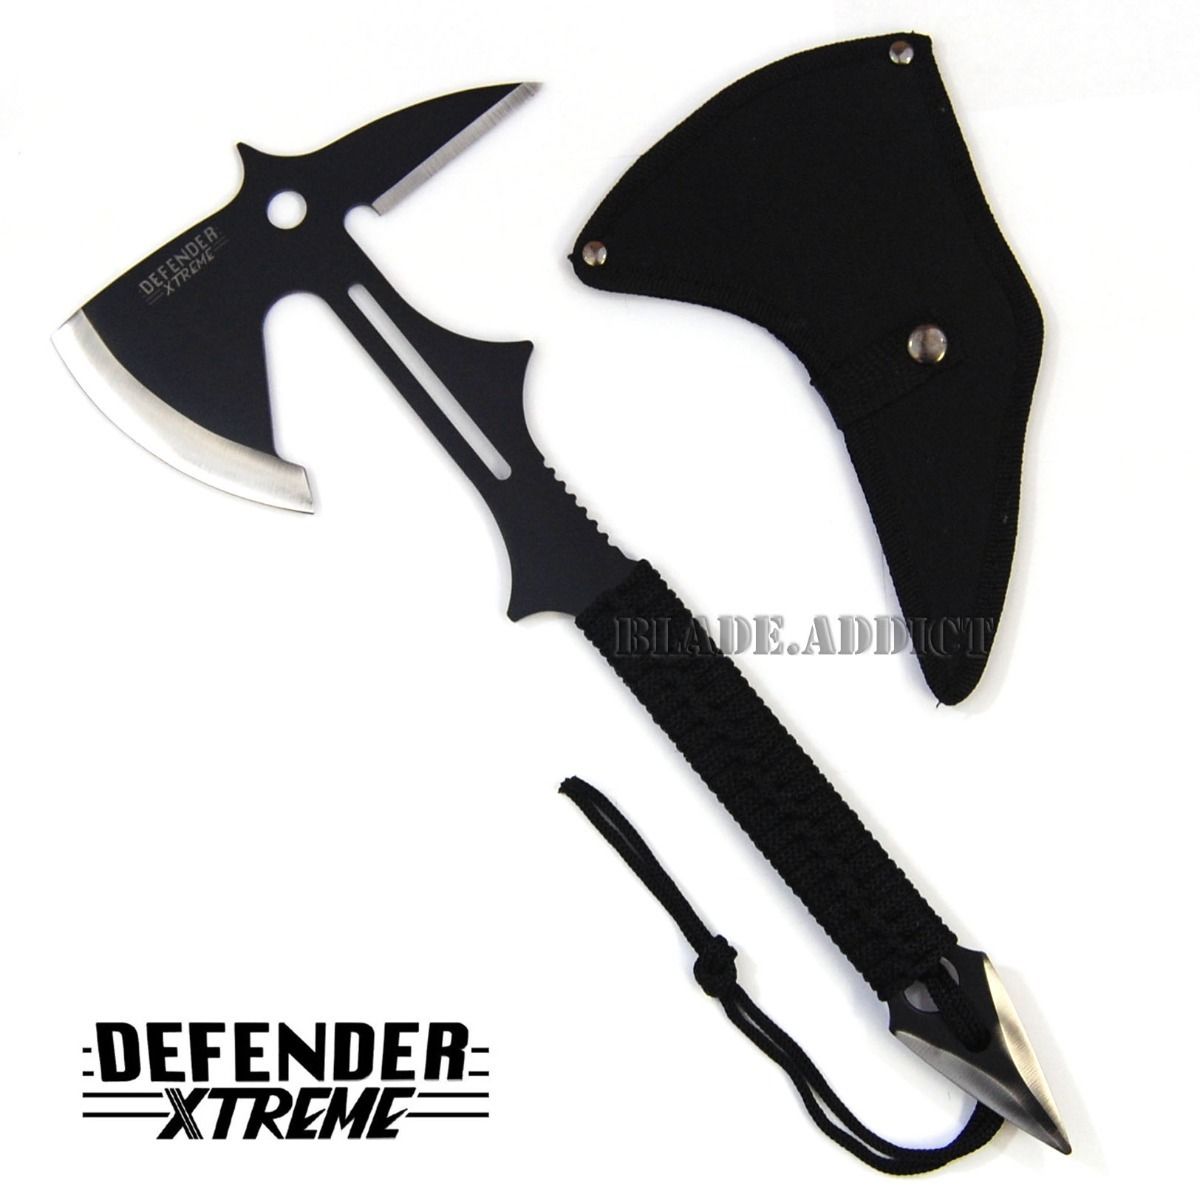 15" Full Tang Survival Tomahawk Throwing Axe Hatchet Tactical Hunting Knife NEW